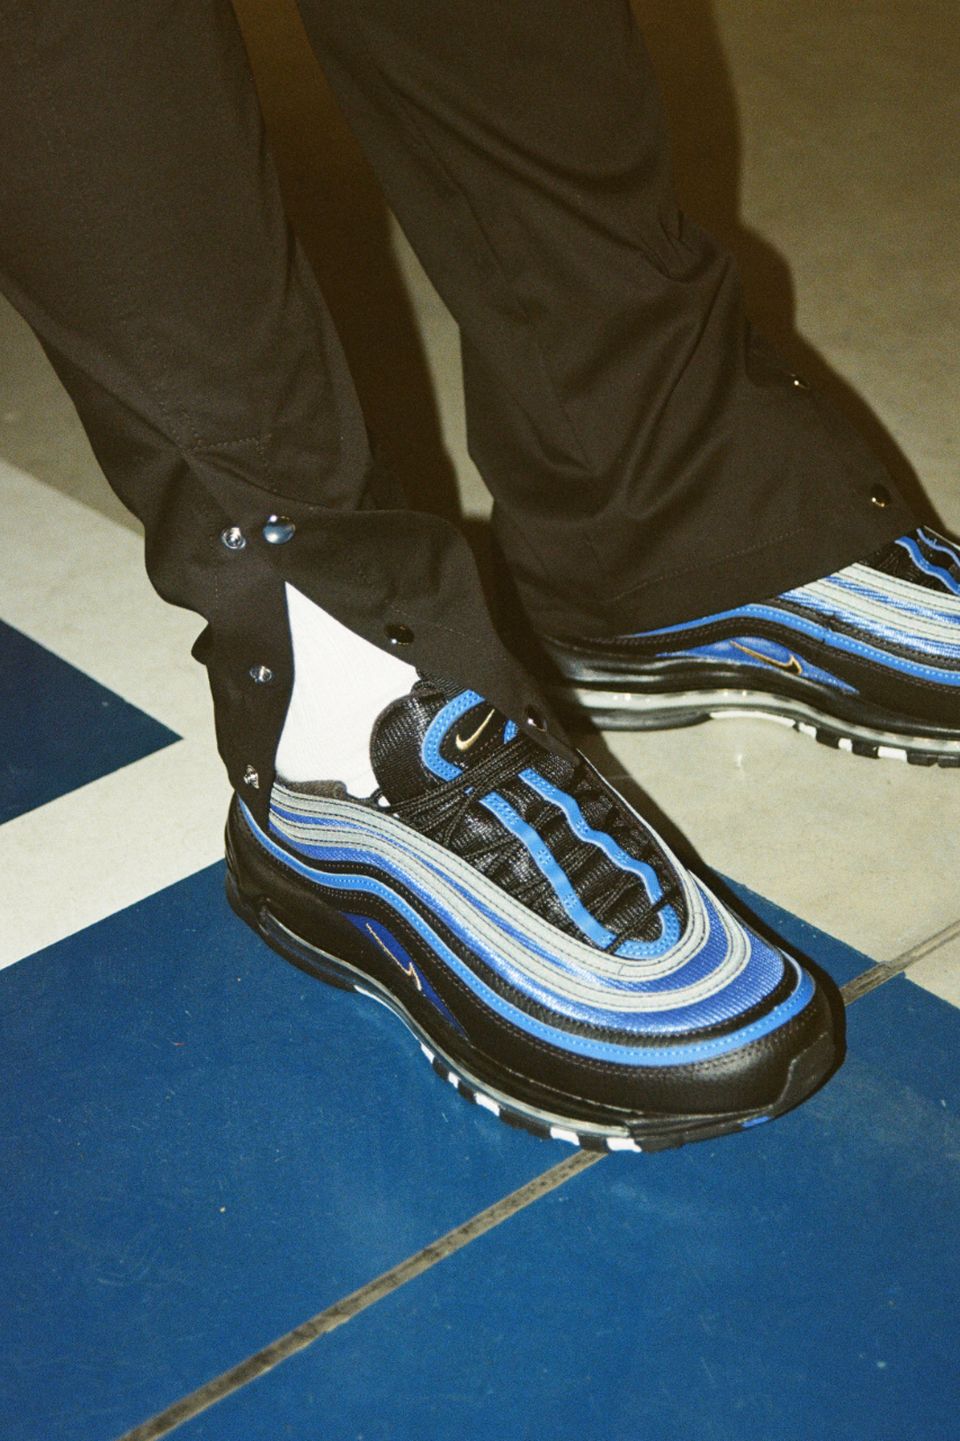 Inter's Nike Air Max 97 Is a Contender For Sneaker of the Year